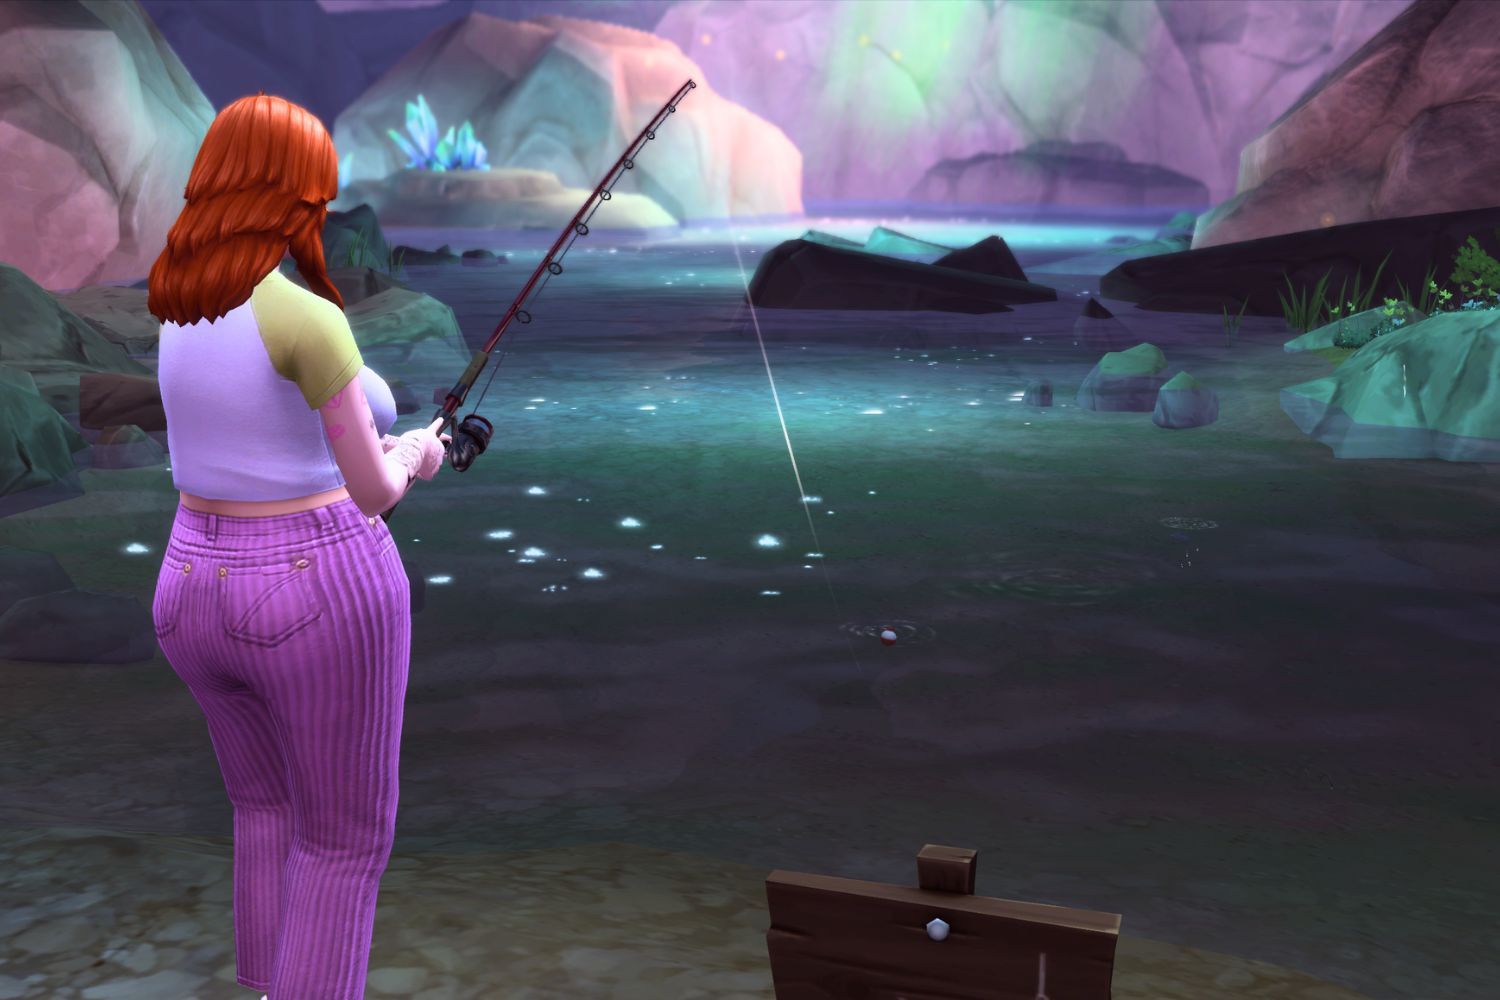 A feminine Sim in pink pants and a green top fishes at the Forgotten Grotto. Crystal formations sparkle in the background as she fishes in the dark pond.